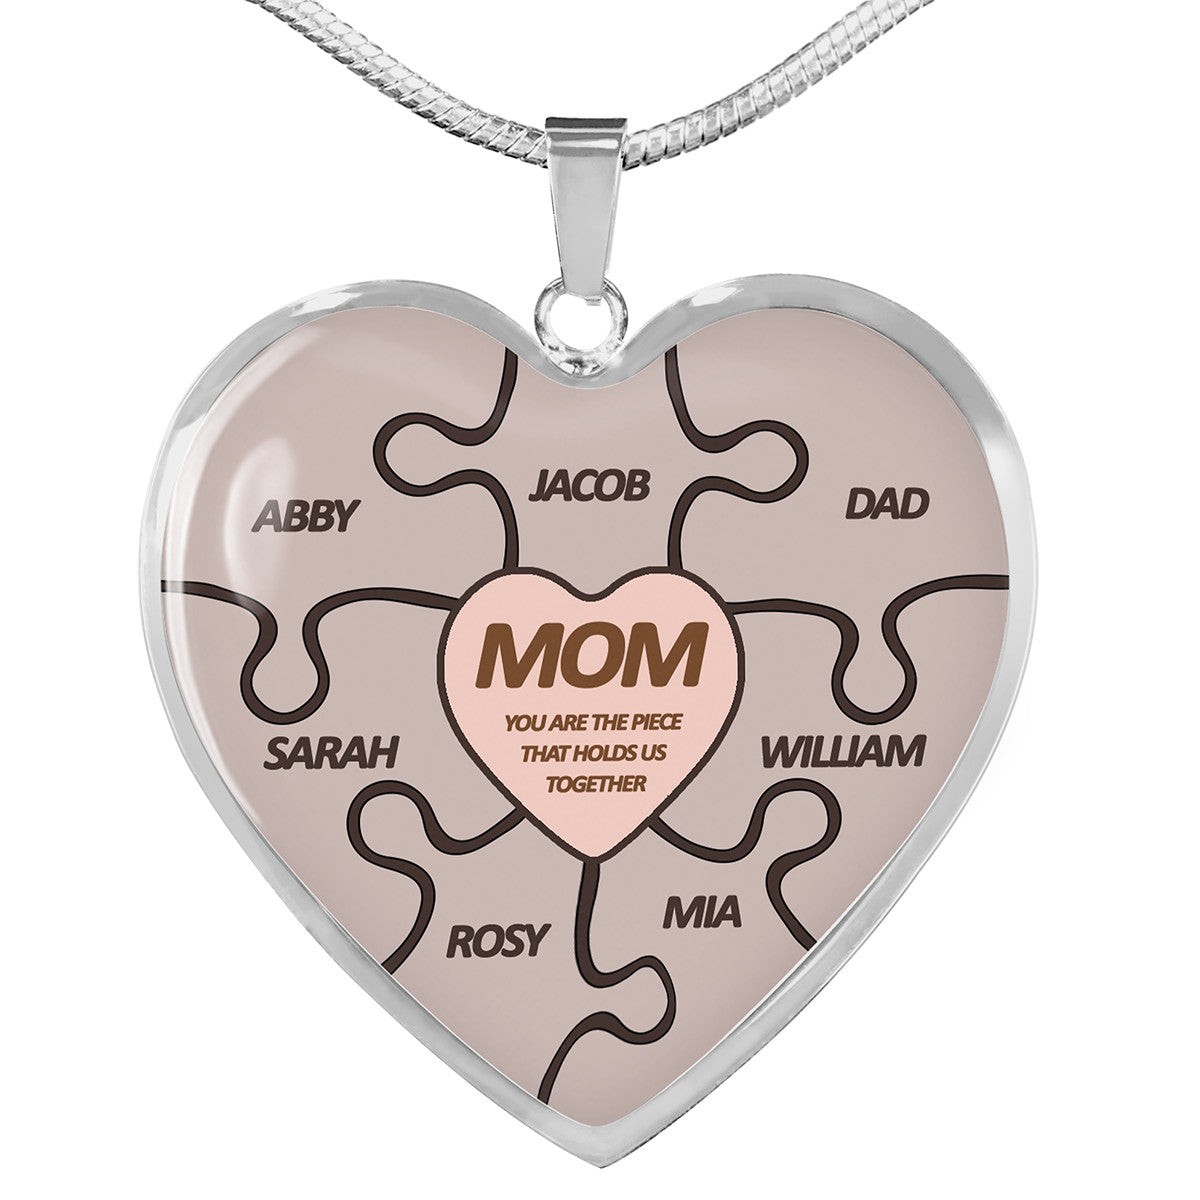 Mom You Are The Piece That Holds Us Together Necklace